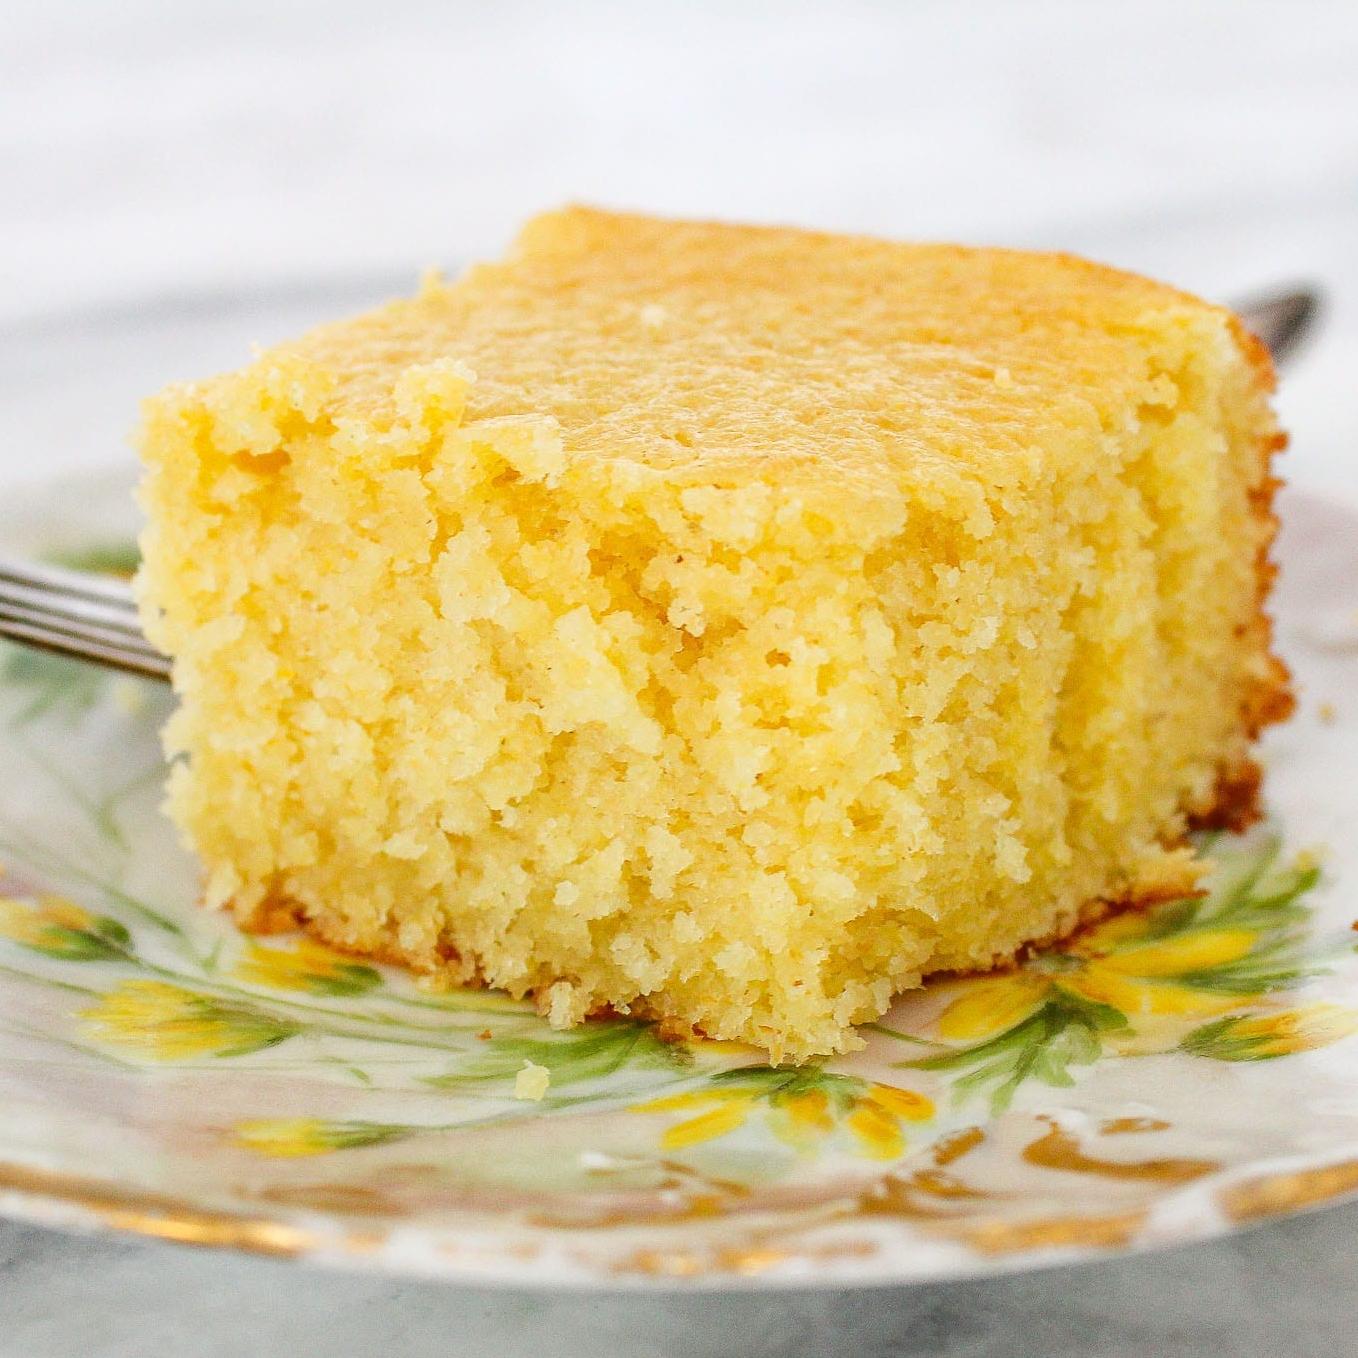  Tuck into this moist, fluffy cornbread as a side or a main, you won't regret it!